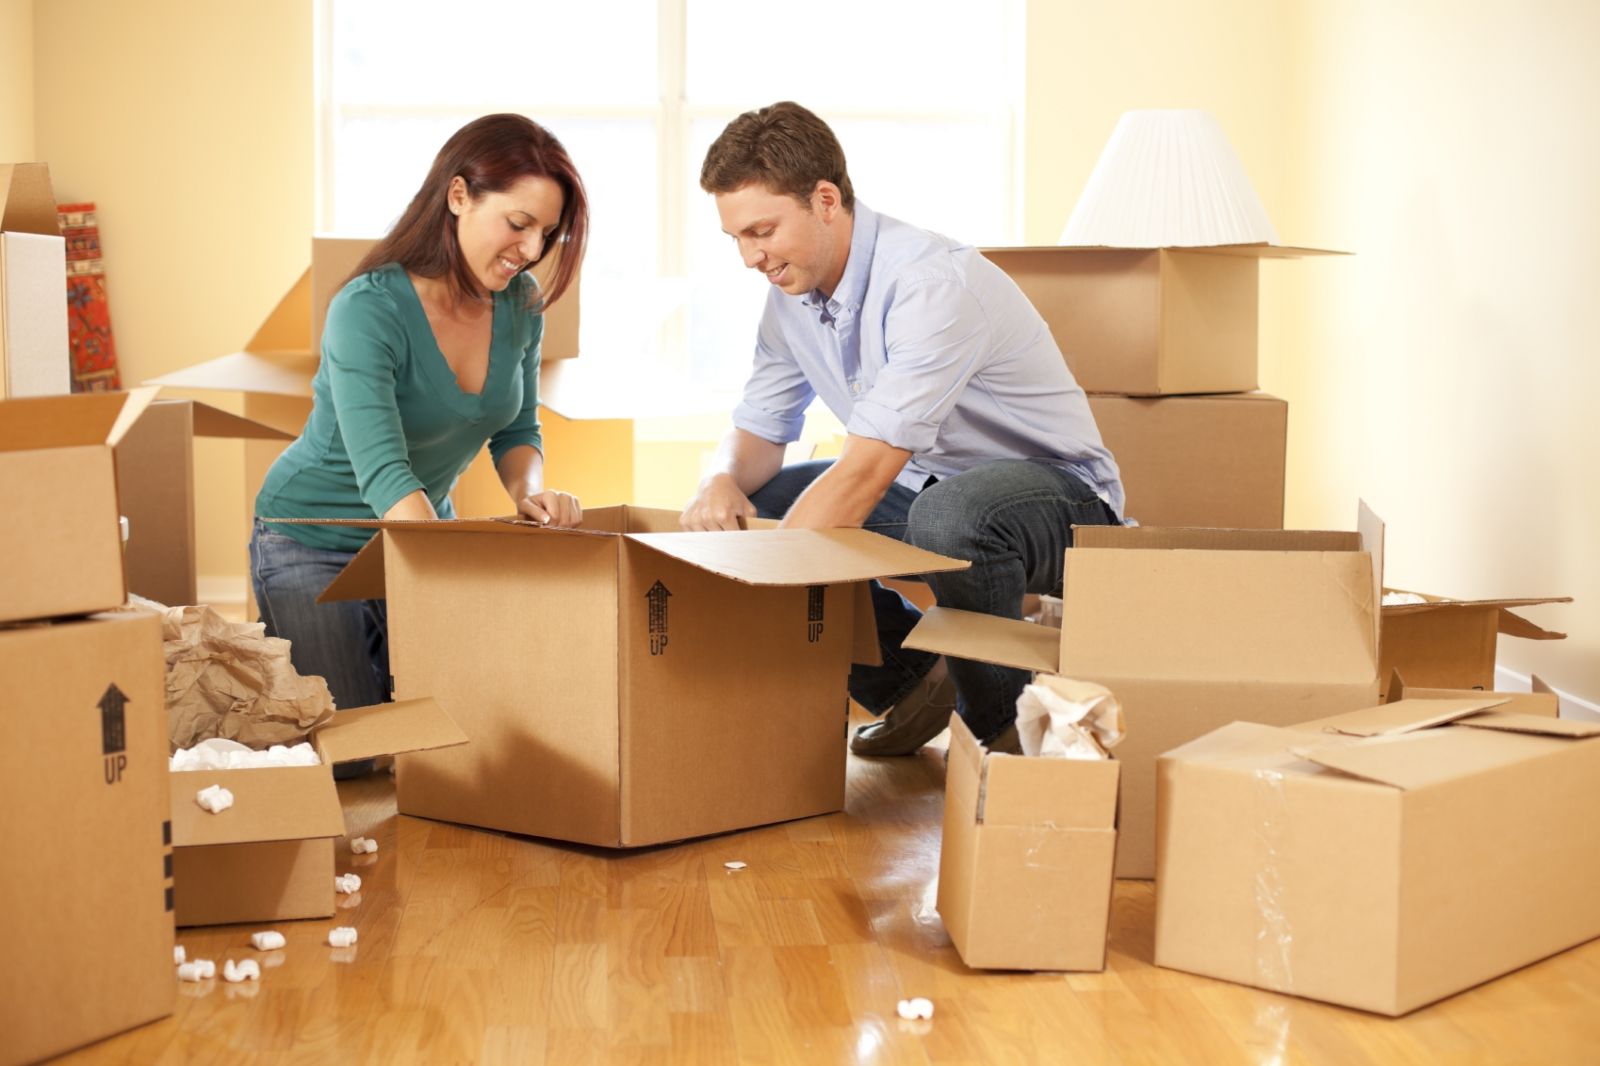 9 Things People Often Forget When Relocating in Hurry